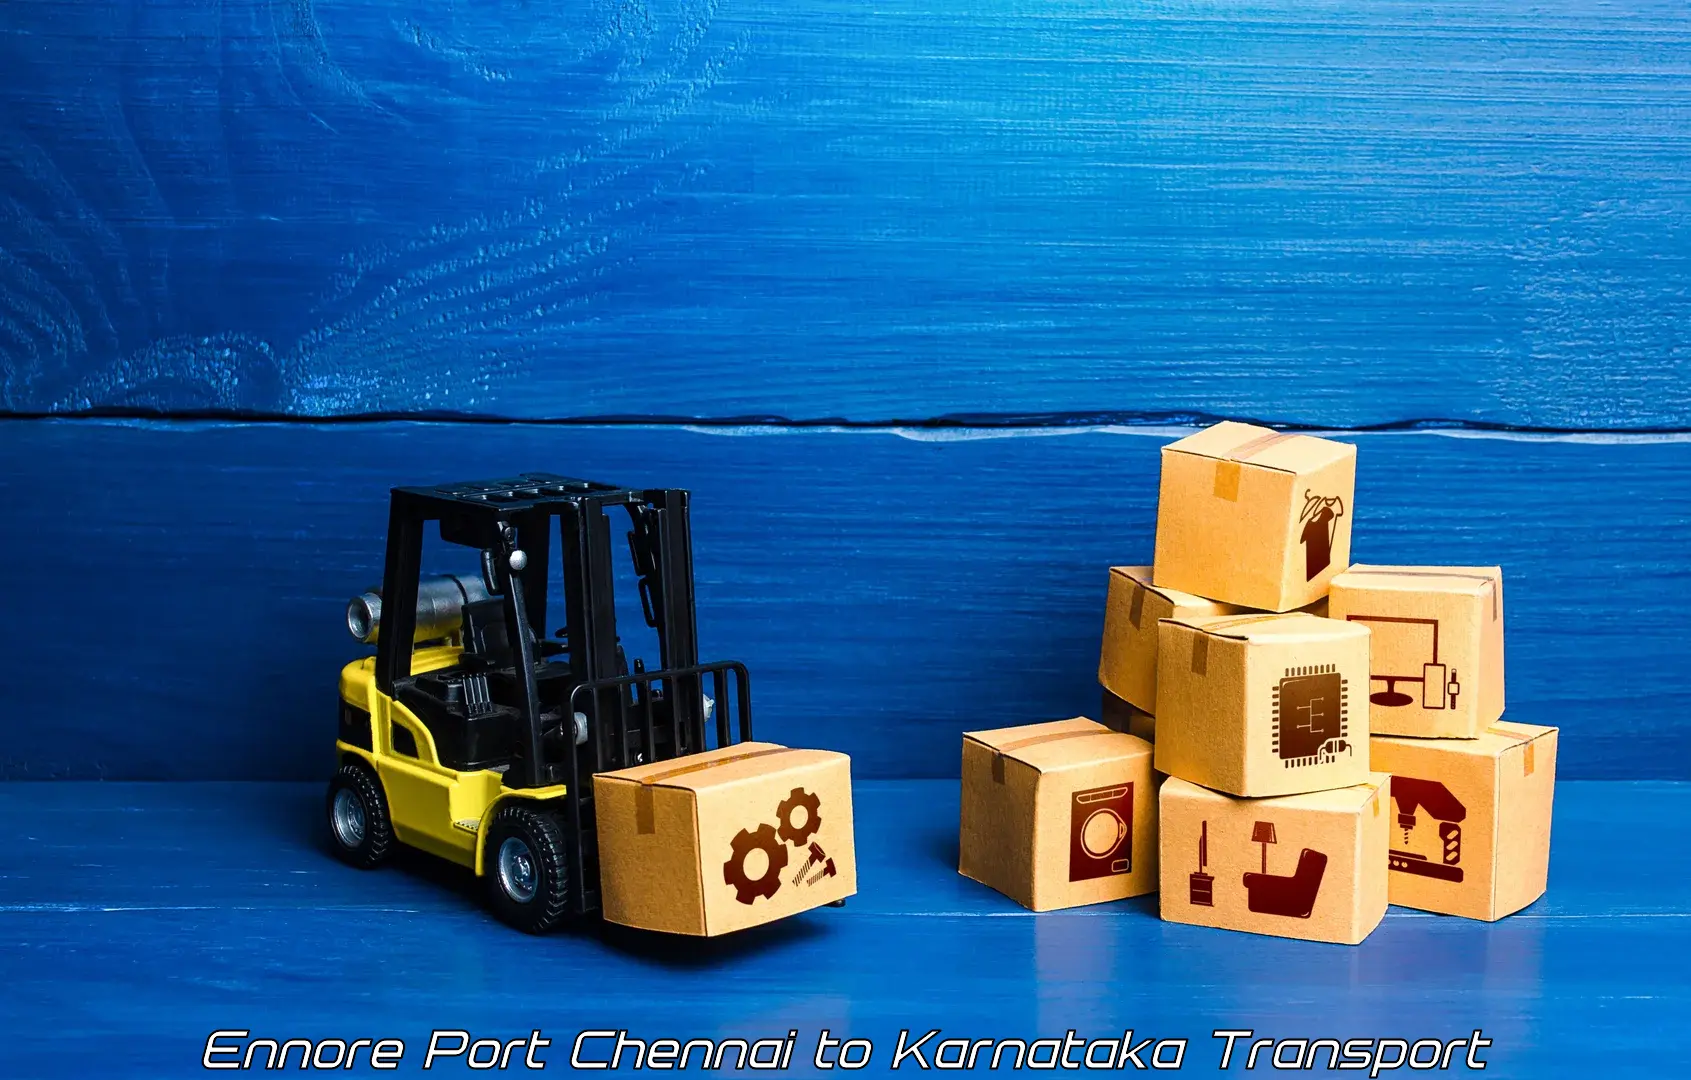 Container transport service Ennore Port Chennai to Bangalore